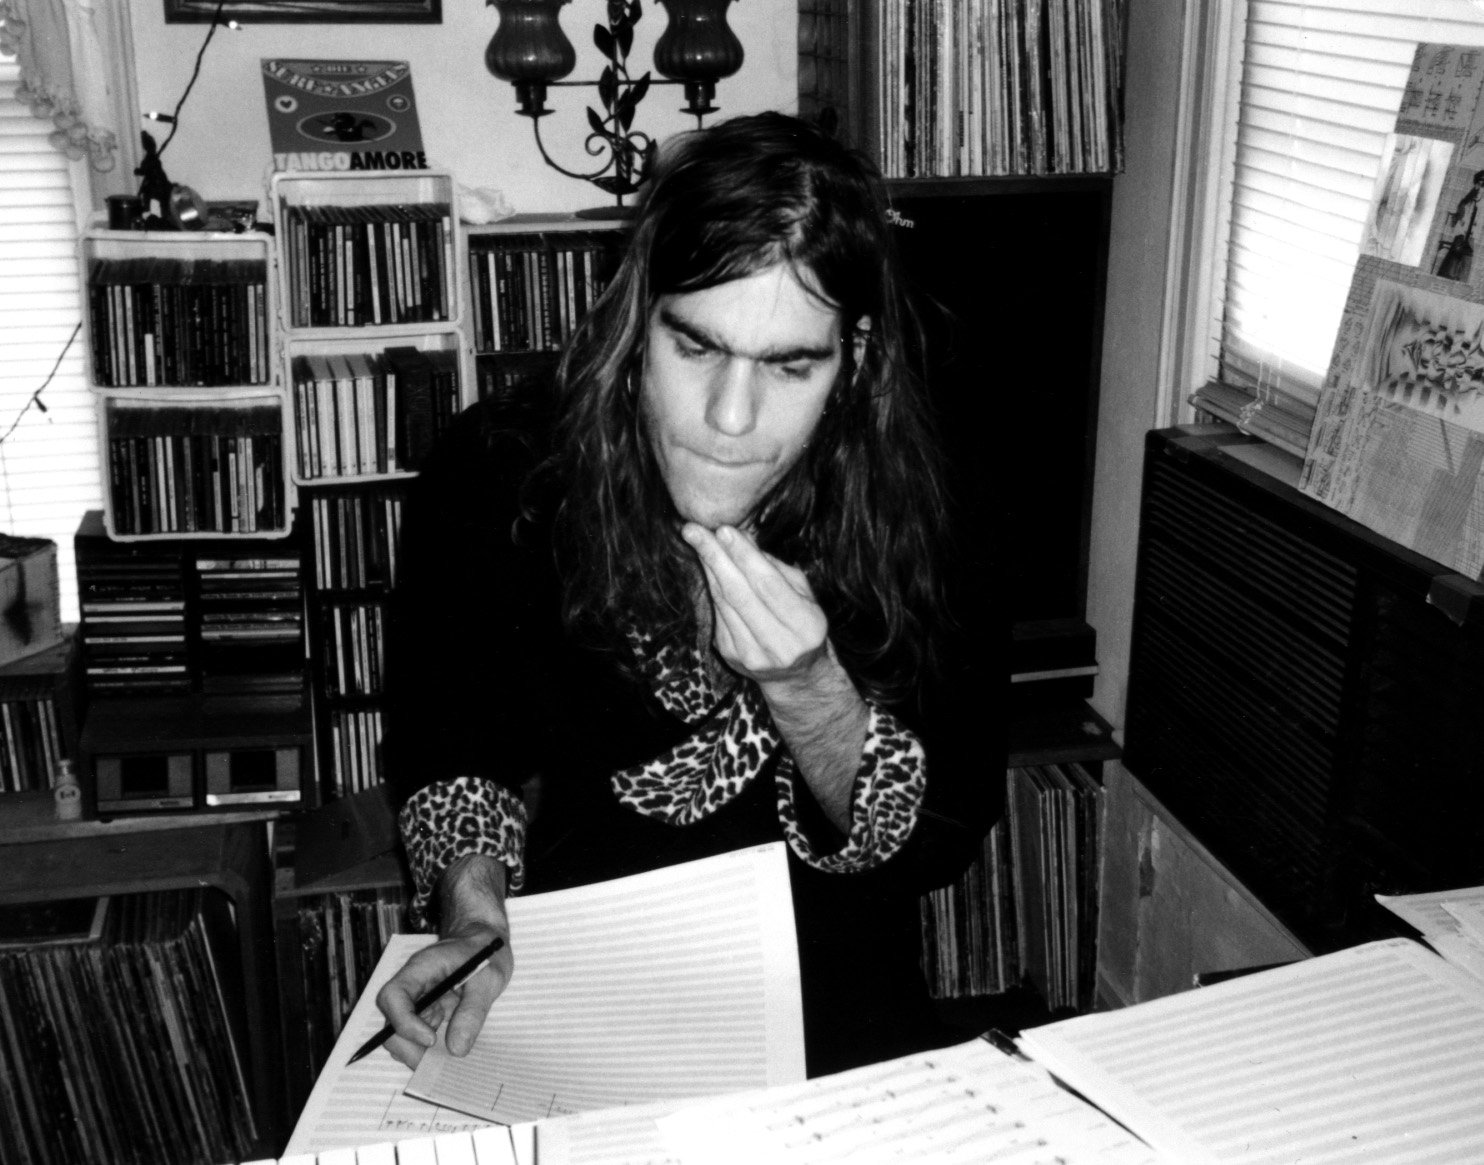 Reynolds composing in Austin in the '90s.